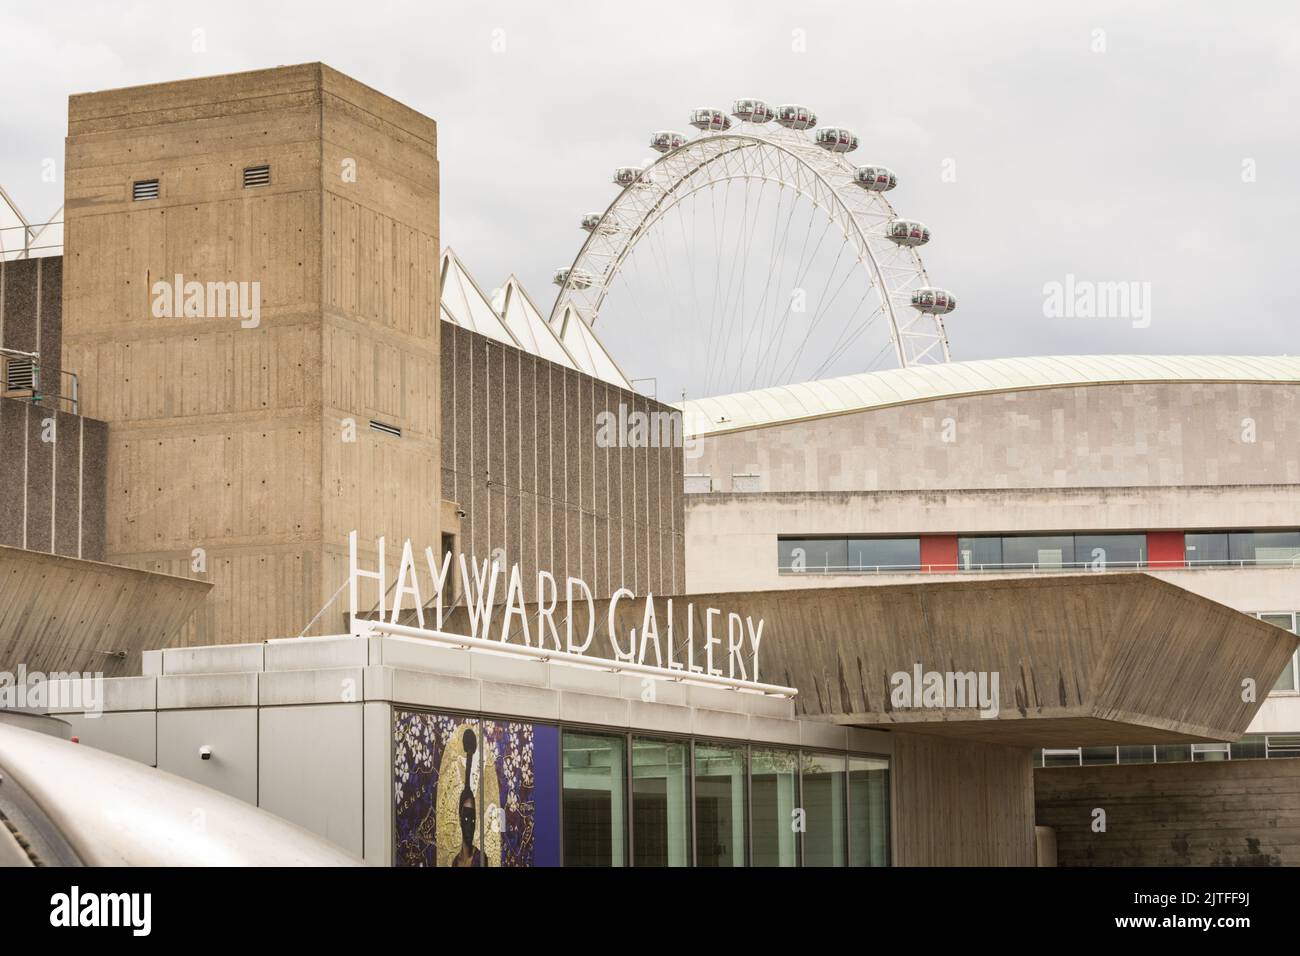 The Hayward Gallery and the Millenium Wheel (London Eye), Southbank Center, Belvedere Road, Londres, SE1, ROYAUME-UNI Banque D'Images